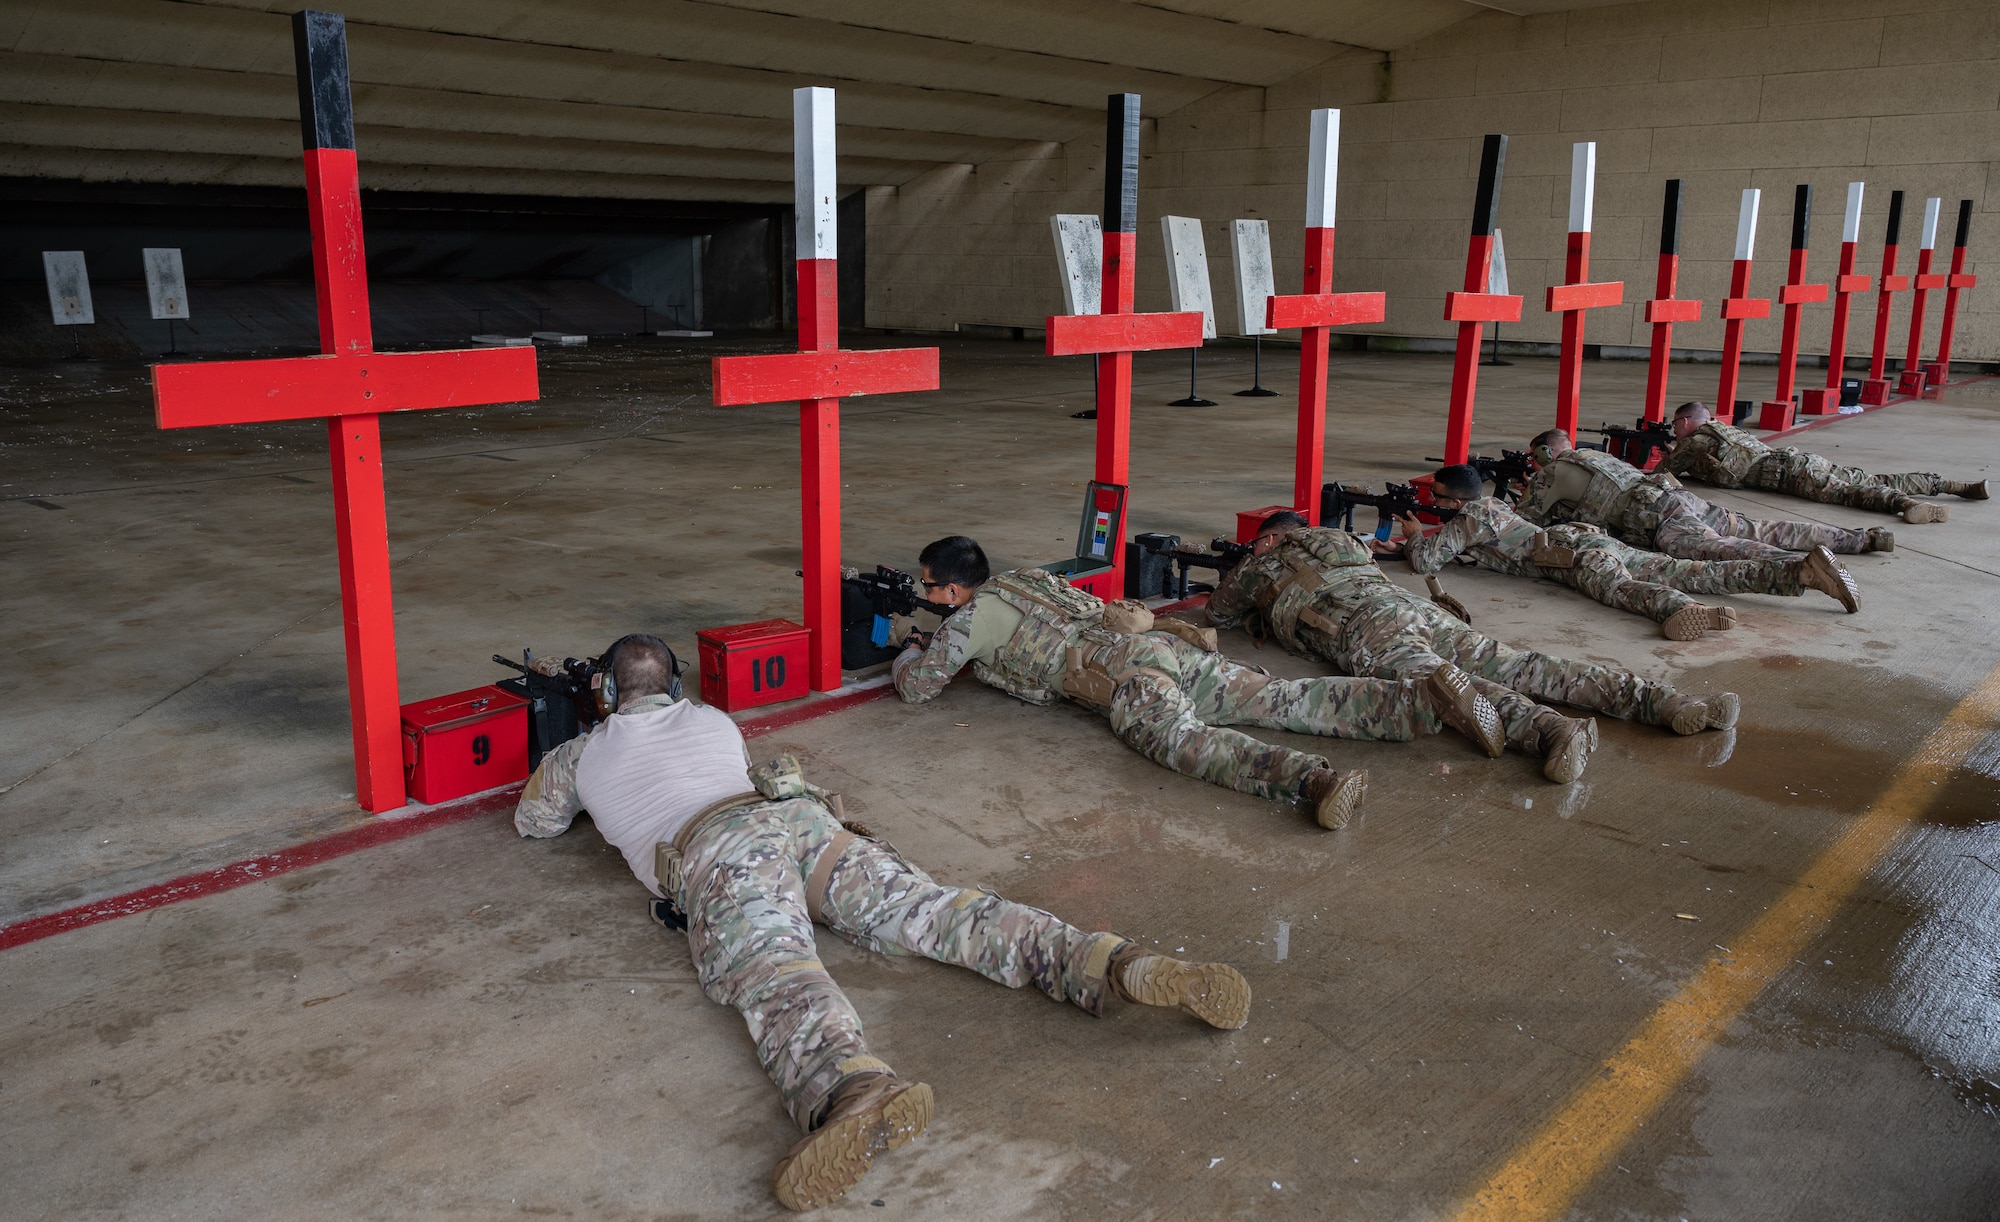 During the actual challenge participants will conduct a time trial shooting of the M4 rifle, M8 armored weapon system, M249 light machine gun, and an M320 grenade launcher.